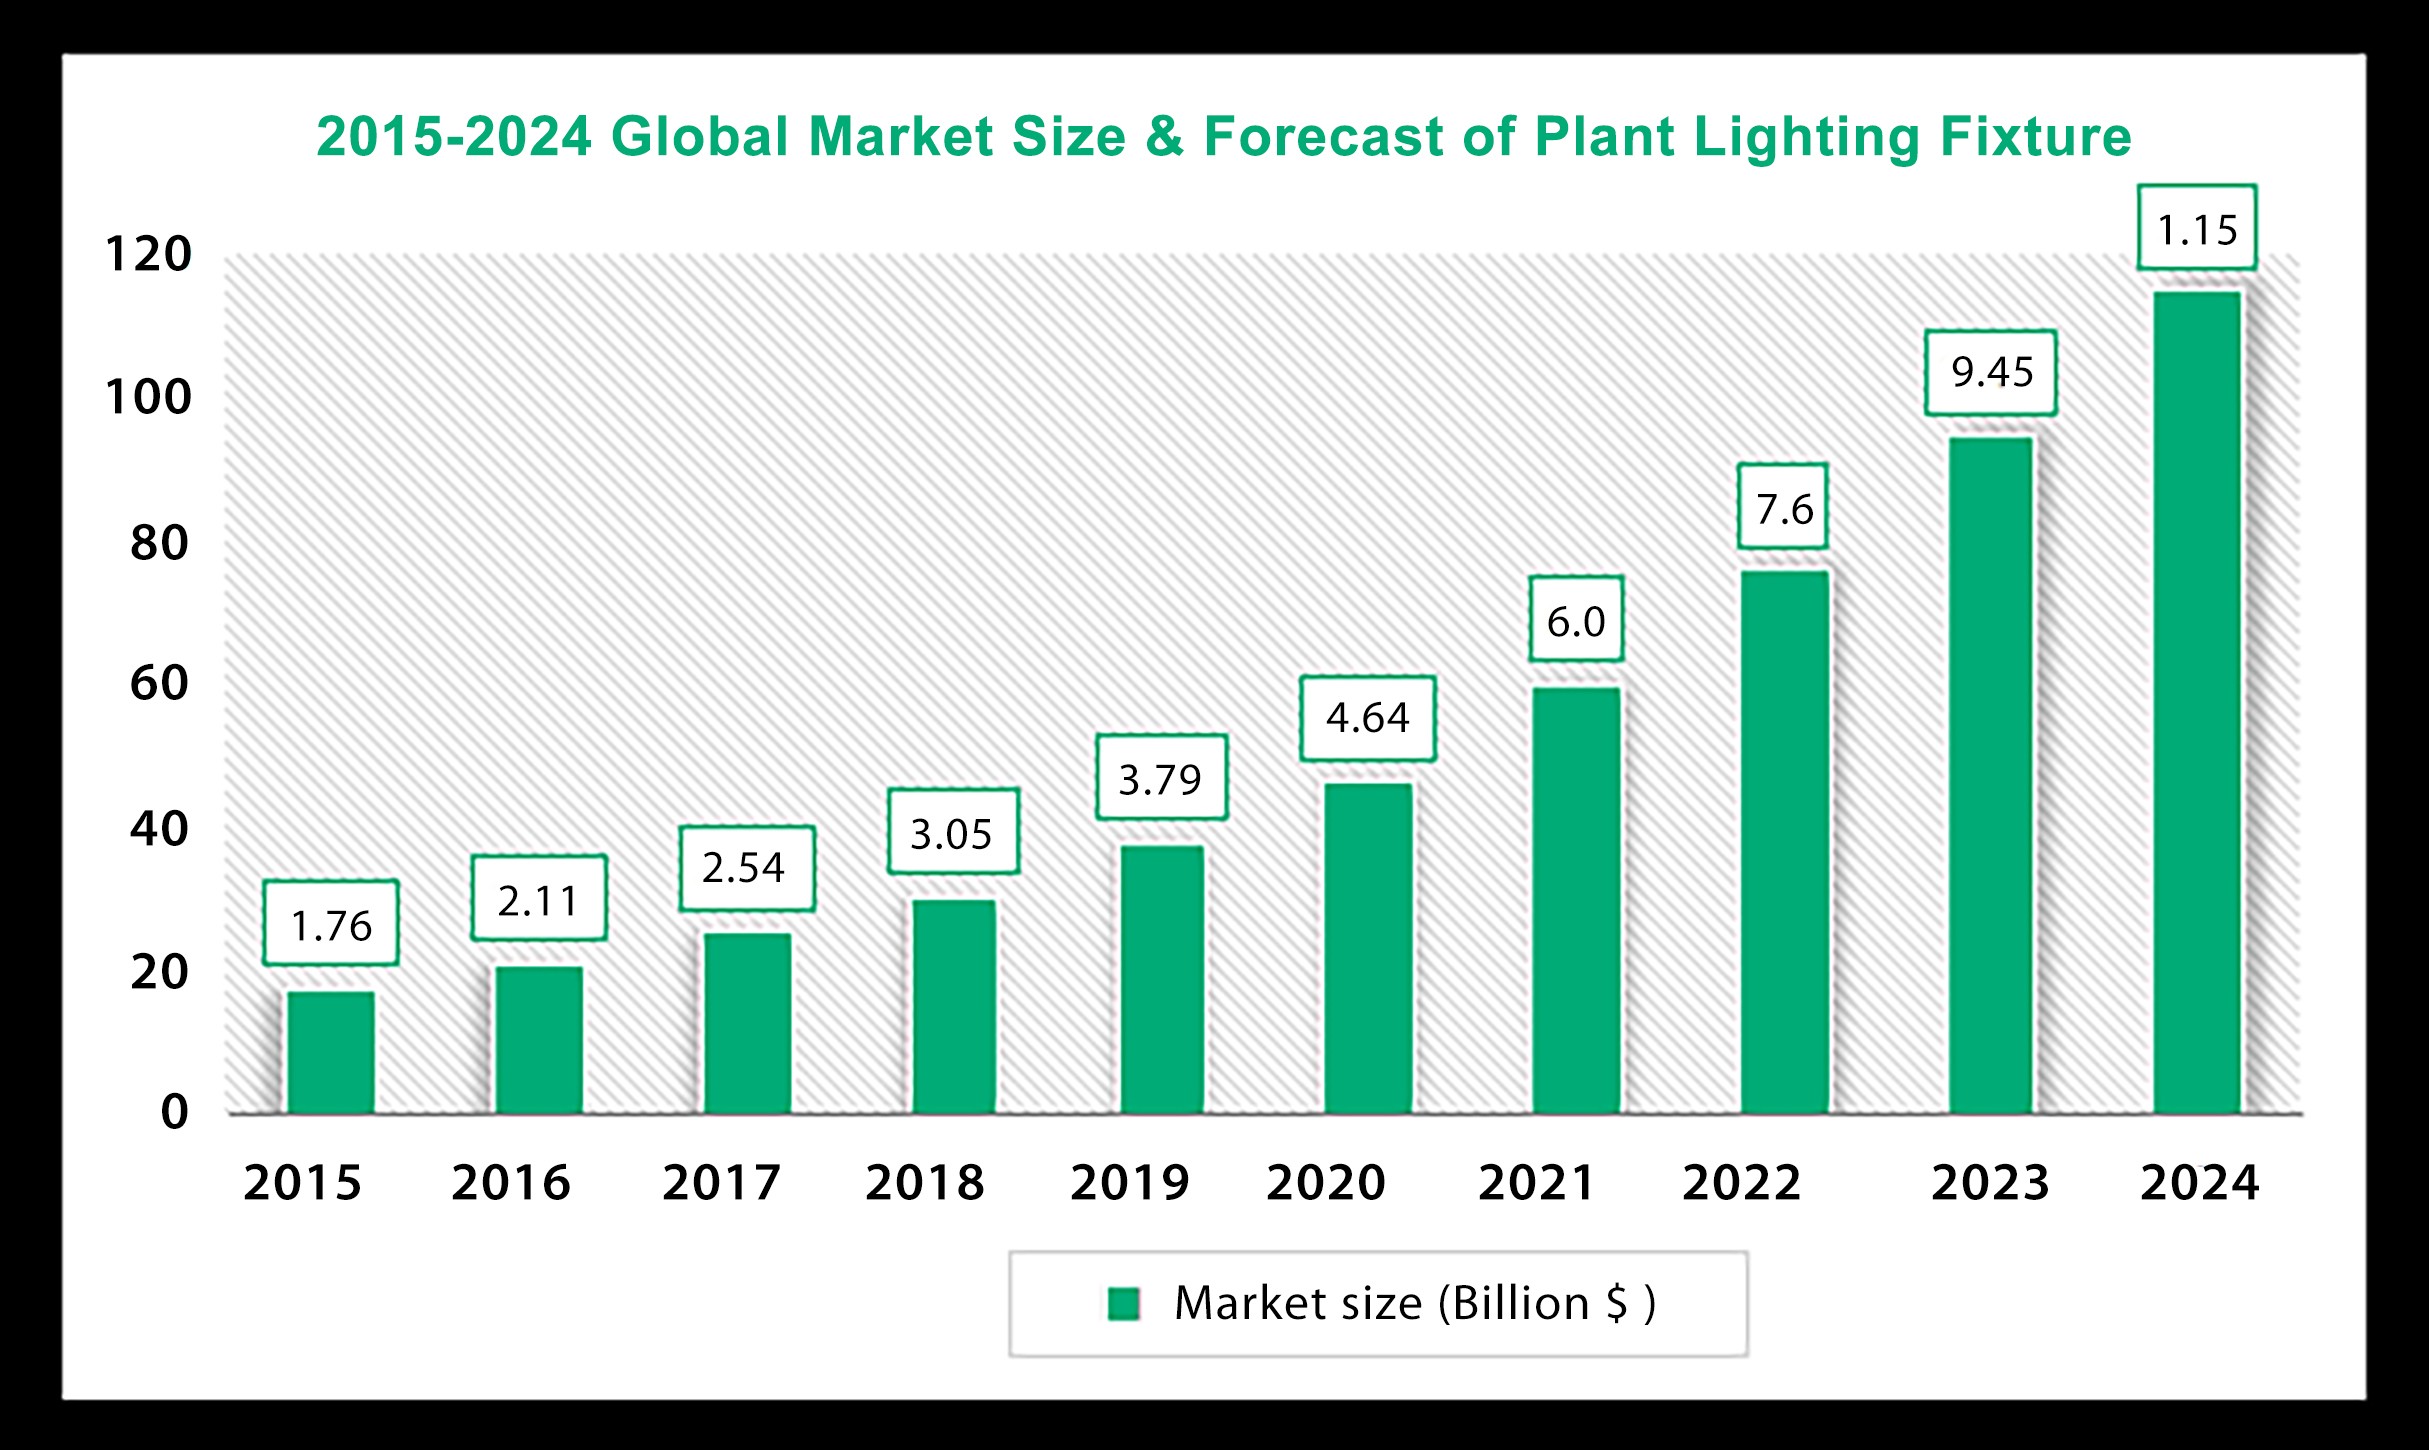 Global Grow Lighting Market Report: Projected to Reach $11.5 Billion by 2024